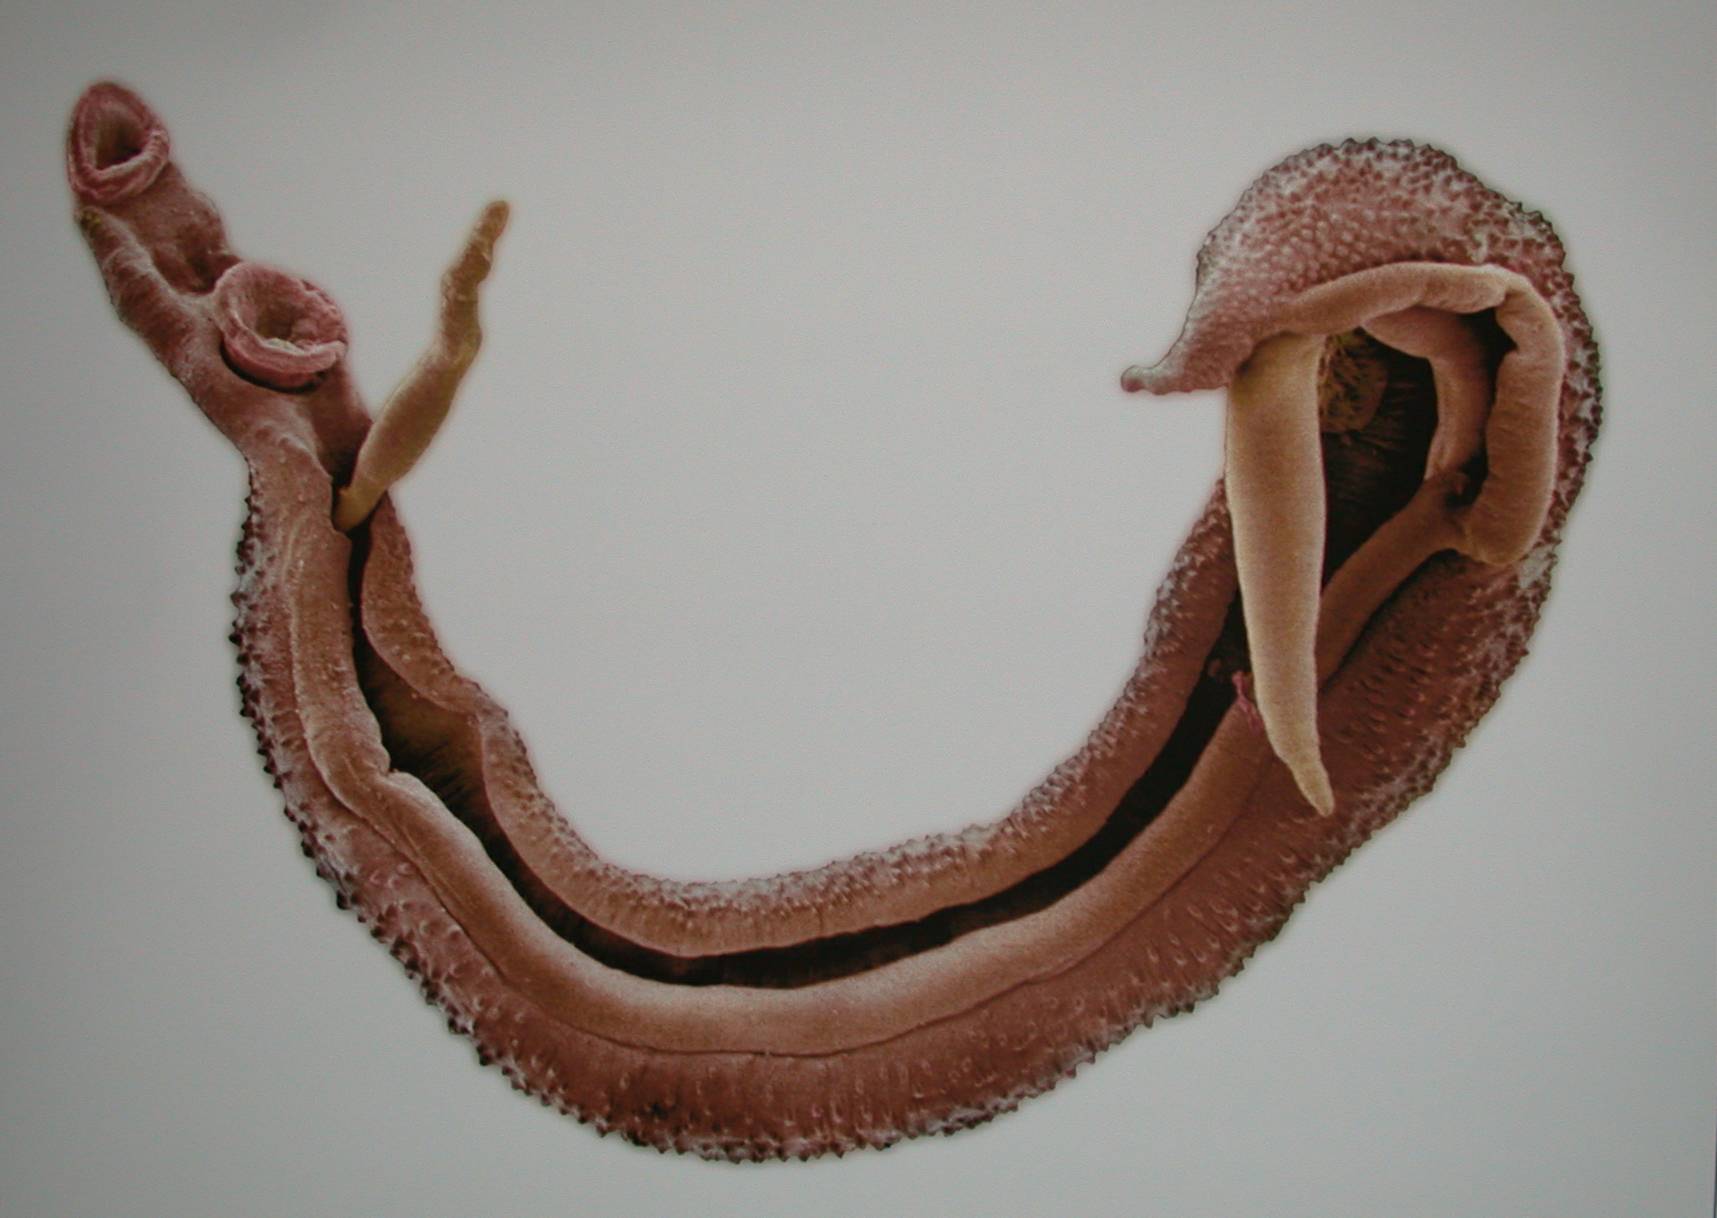 The schistosomiasis worm is a dangerous parasite that can increase the risk of HIV/AIDS infection. Researchers believe this common worm may be responsible for the high rates of HIV infections in women in Africa because of the worm’s behavior in the female body. When women do laundry in the waterways, the worm makes it way up the vaginal canal and creates small sores inside, which open the way for HIV infection.